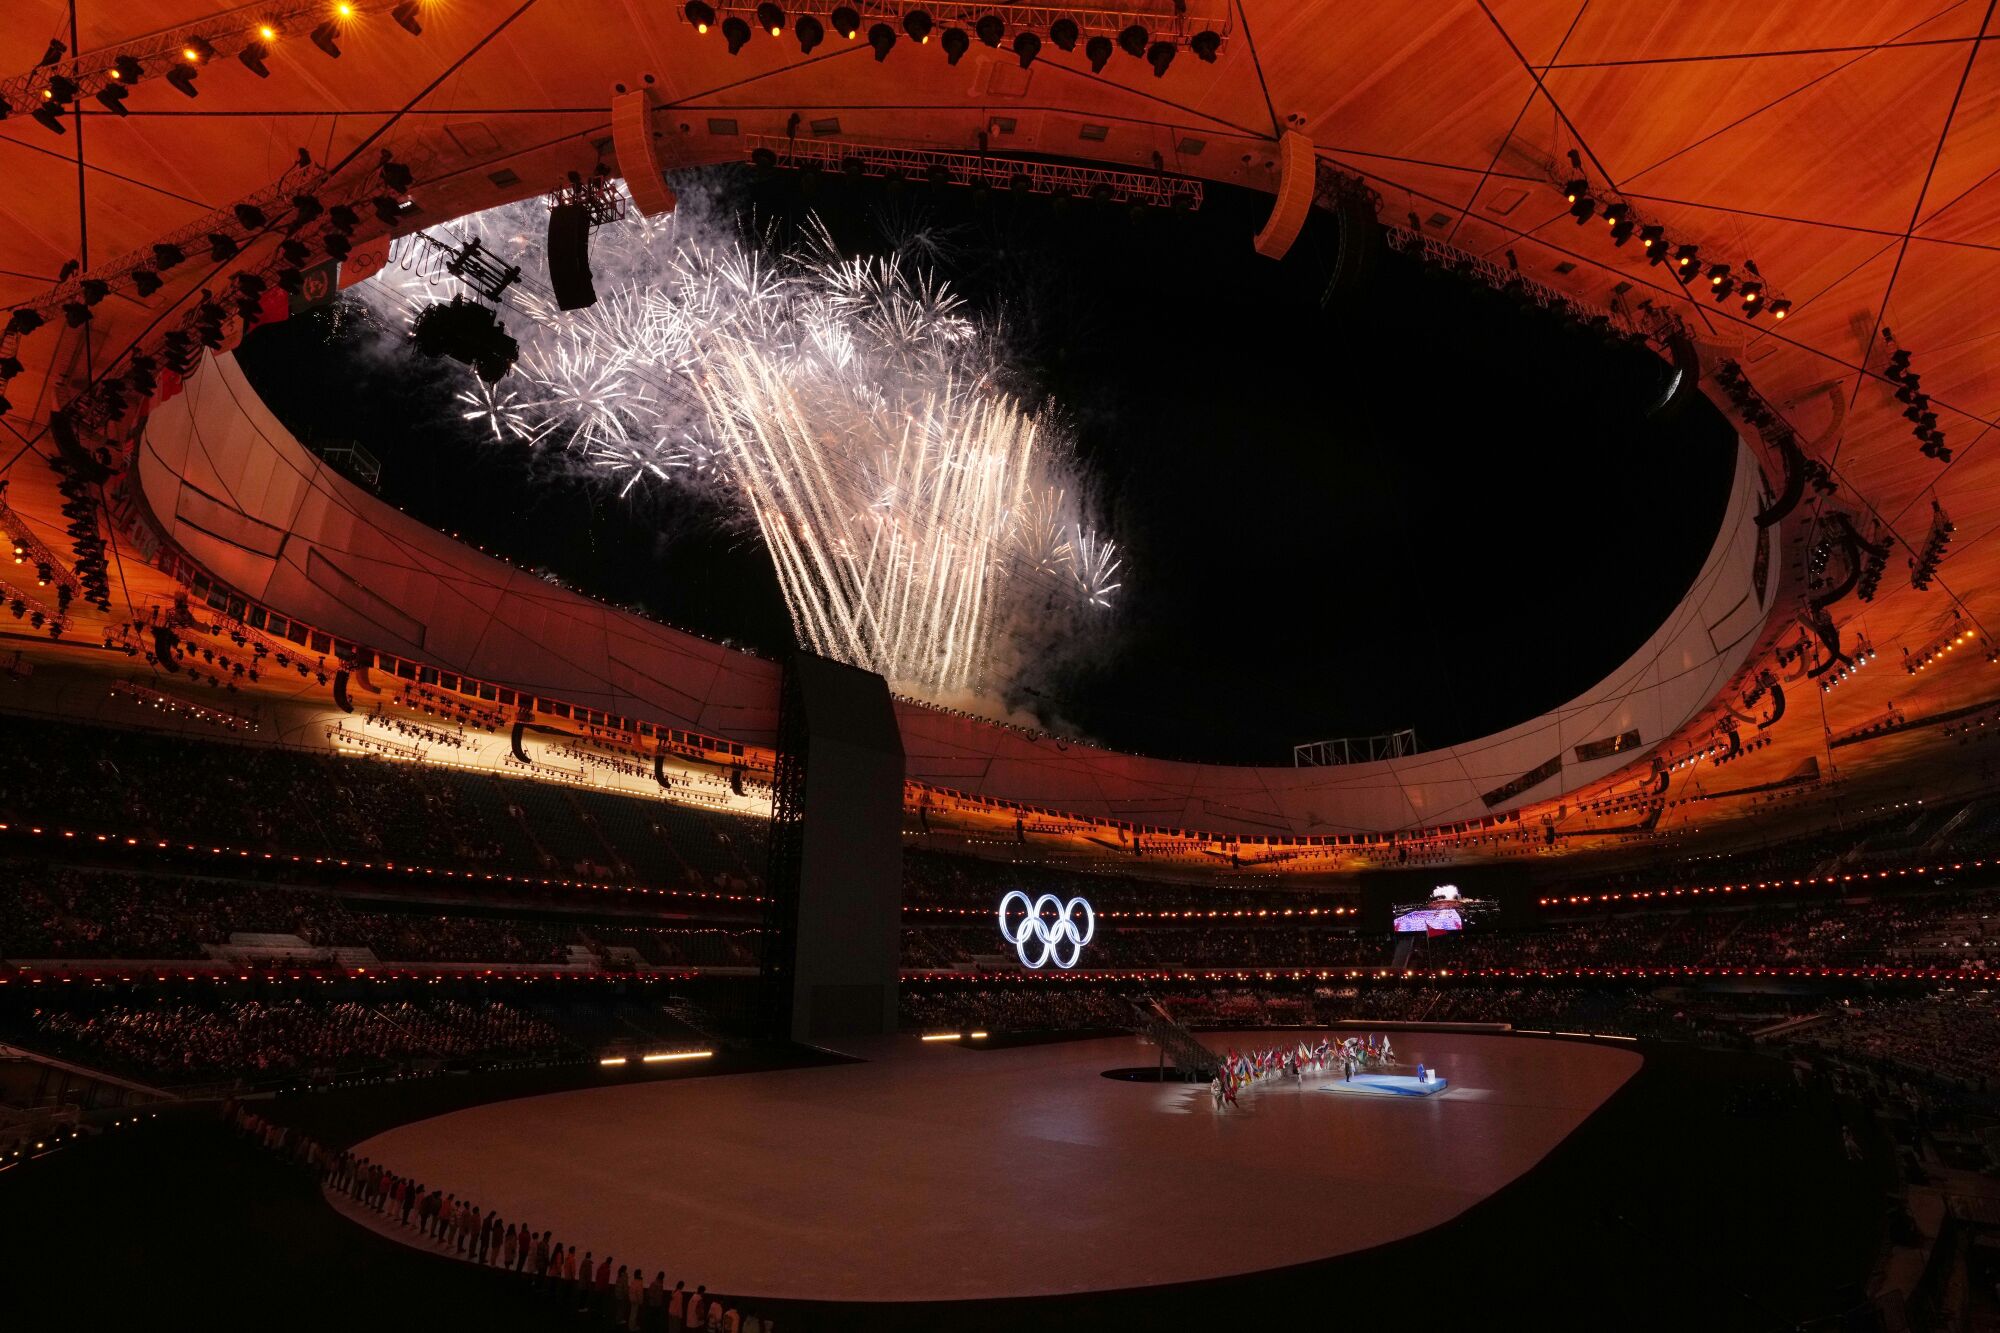 Fireworks burst above National Stadium, known as Bird's Nest, during the opening ceremony